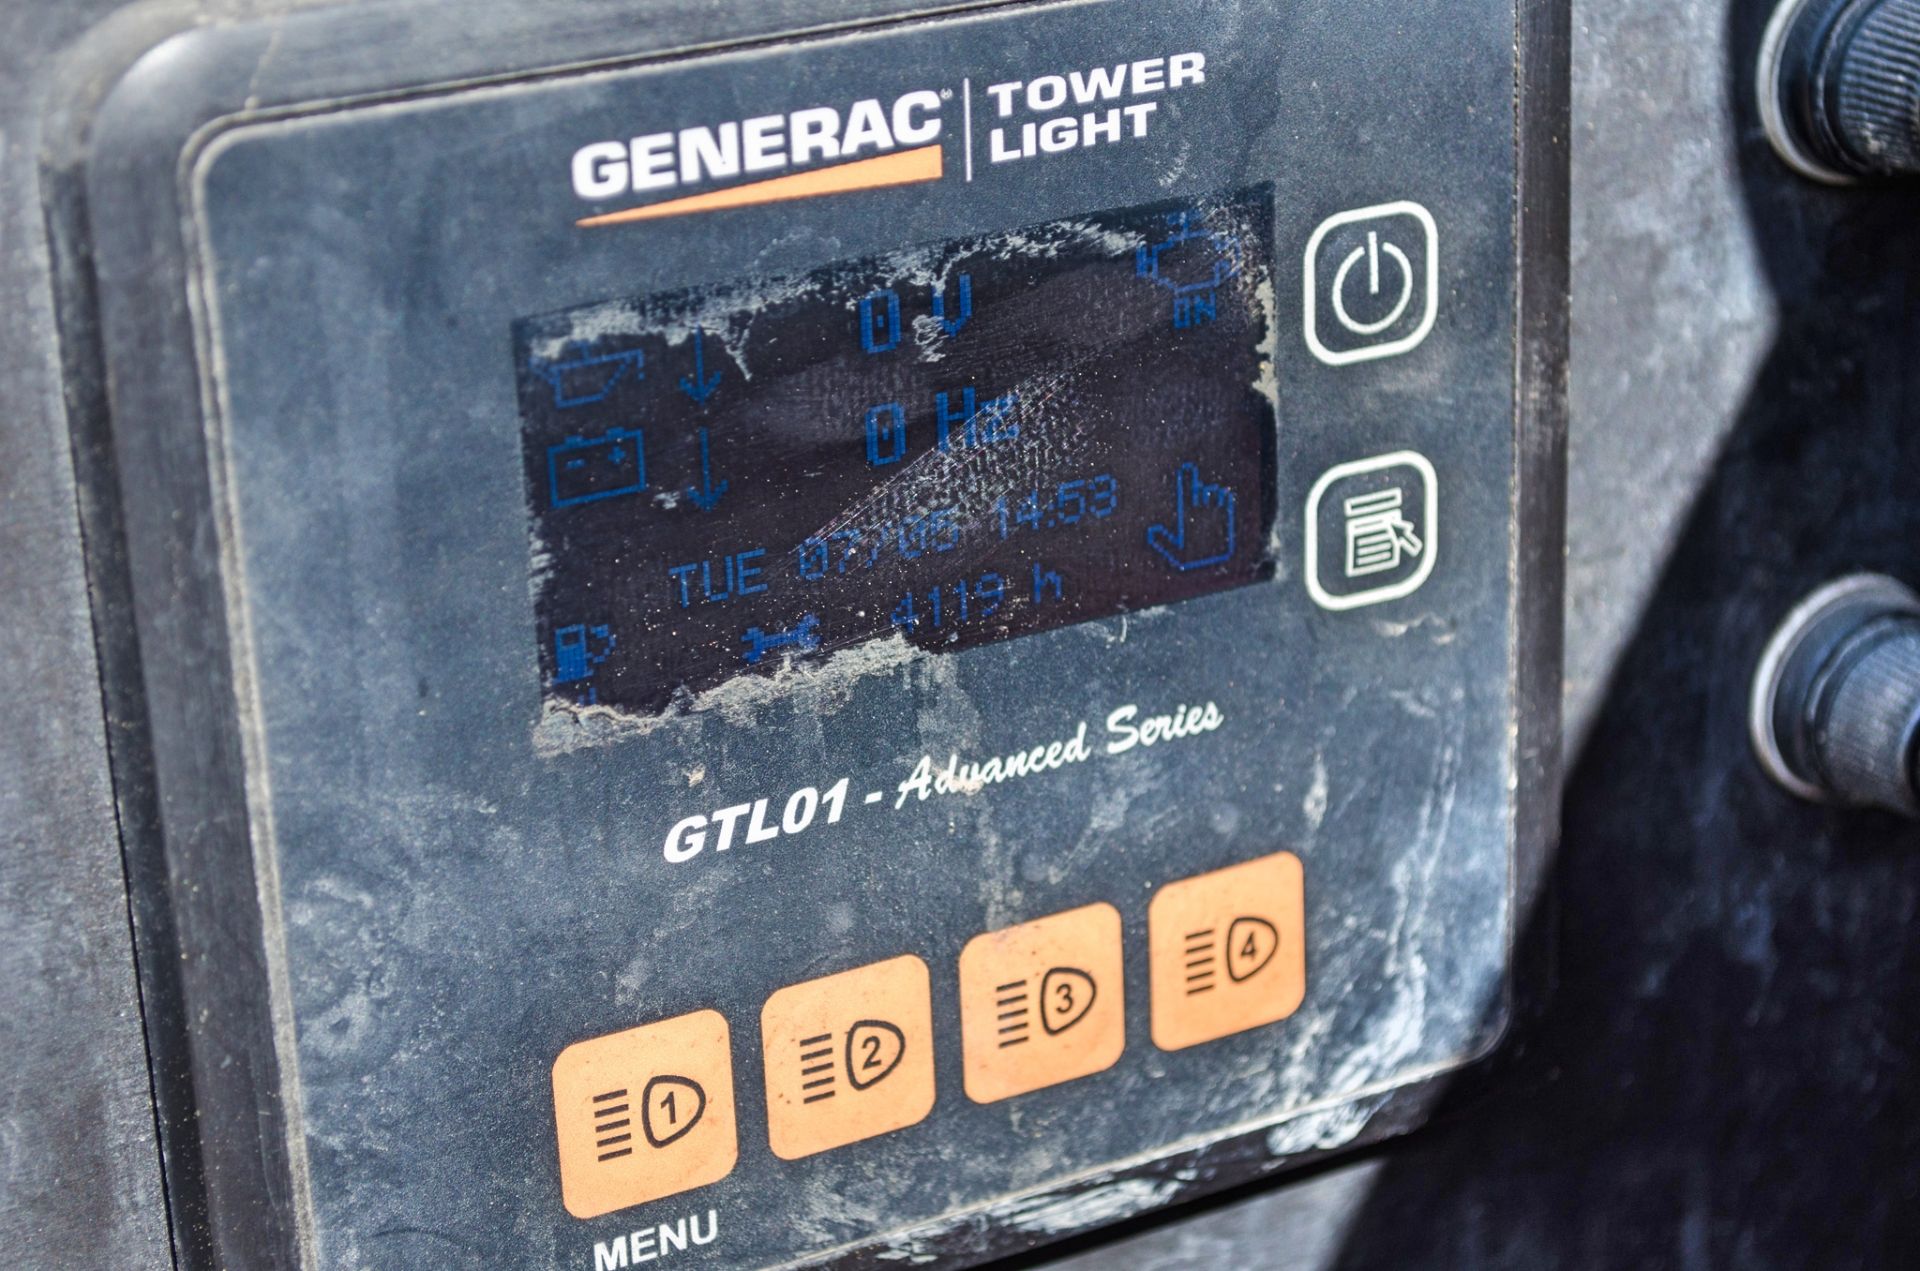 Generac Cube + diesel driven LED static lighting tower Year: 2017 S/N: 1705892 Recorded Hours: - Image 7 of 8